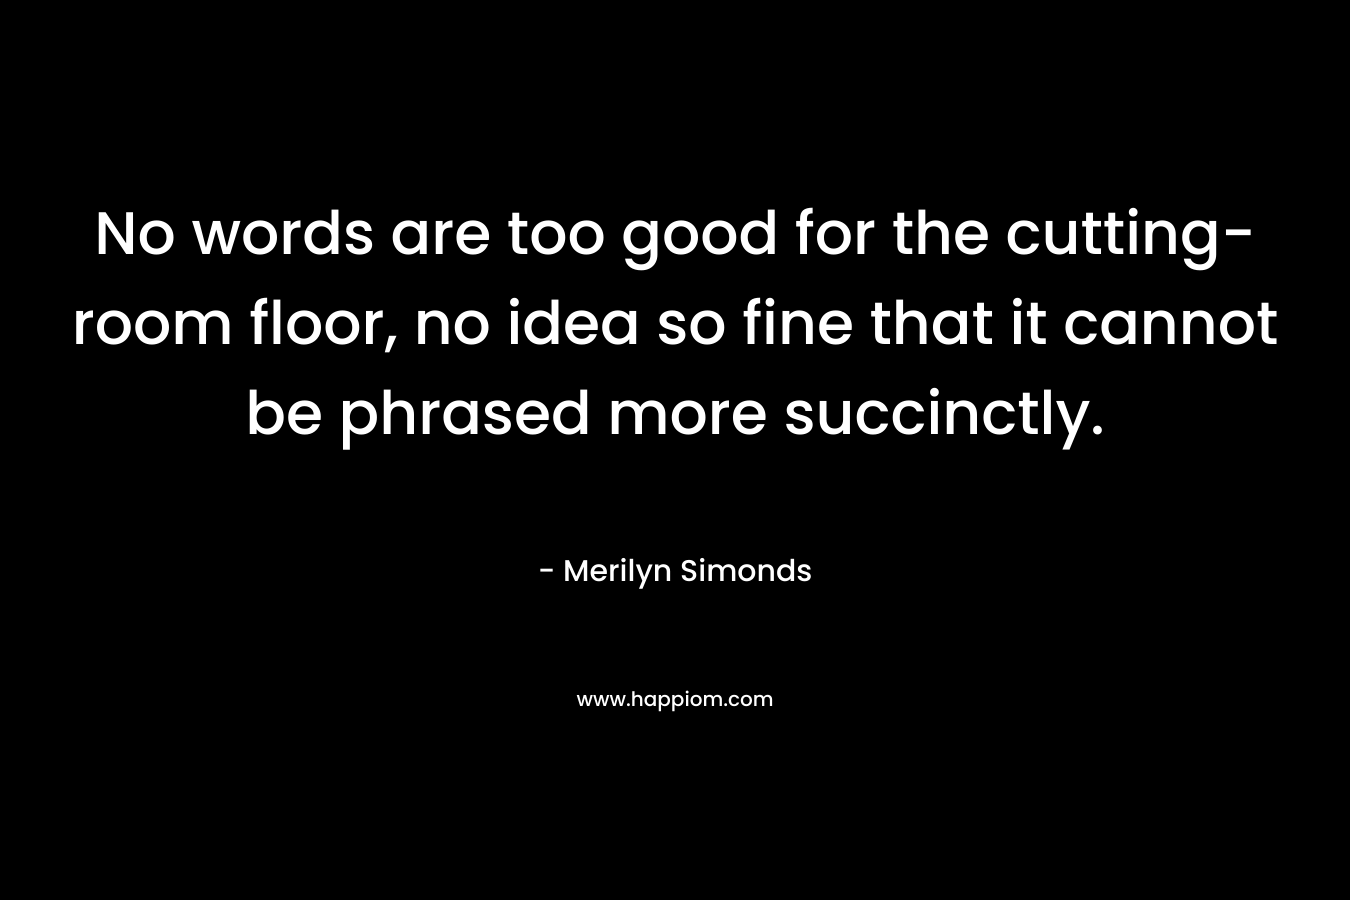 No words are too good for the cutting-room floor, no idea so fine that it cannot be phrased more succinctly. – Merilyn Simonds